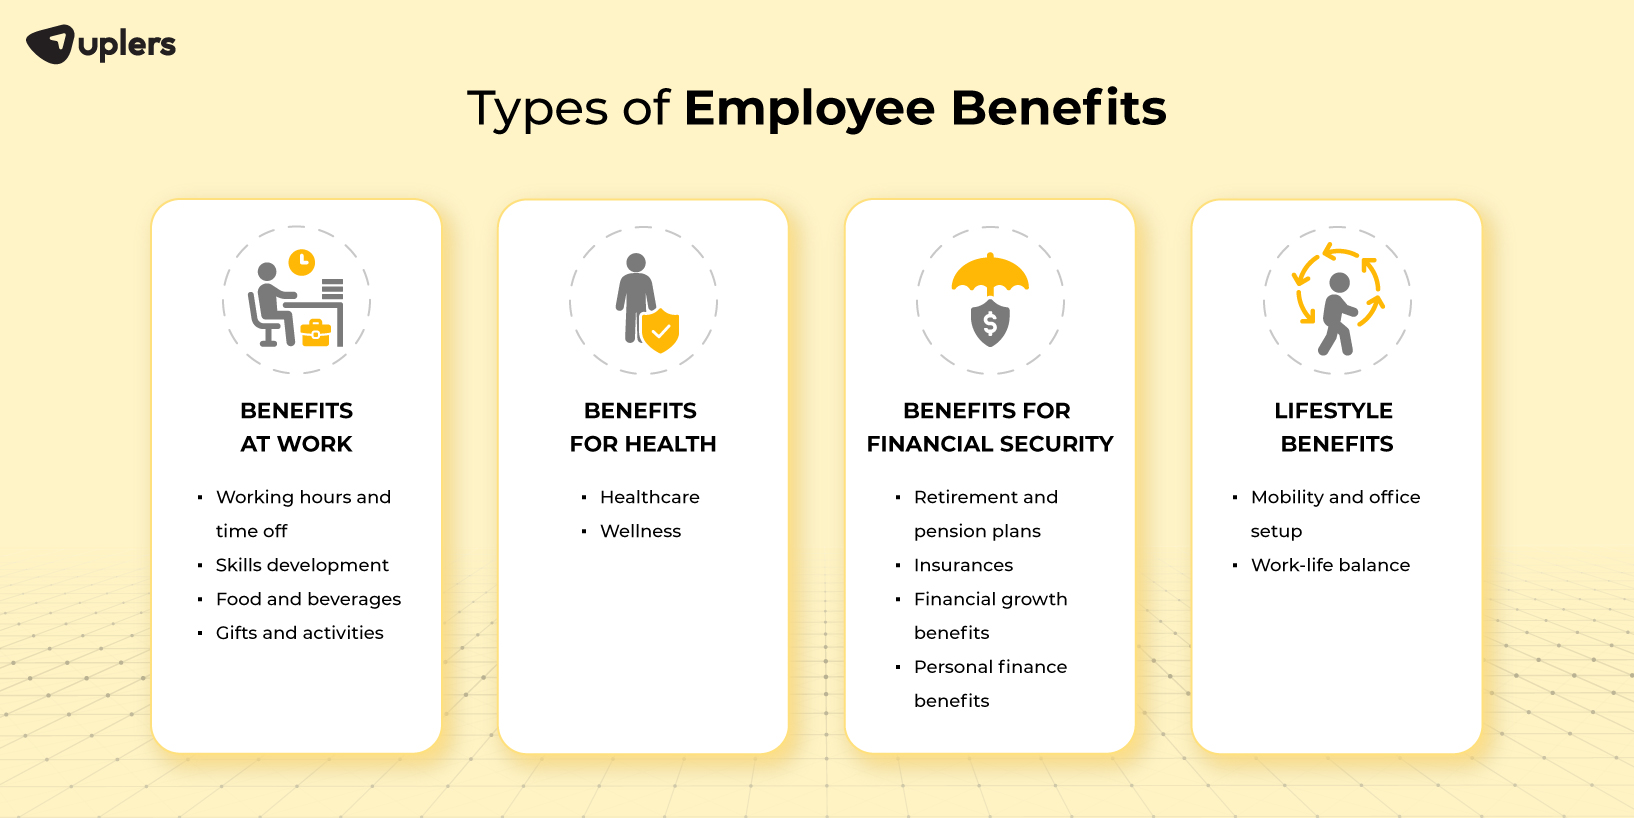 compensation and benefits are related to employee motivation